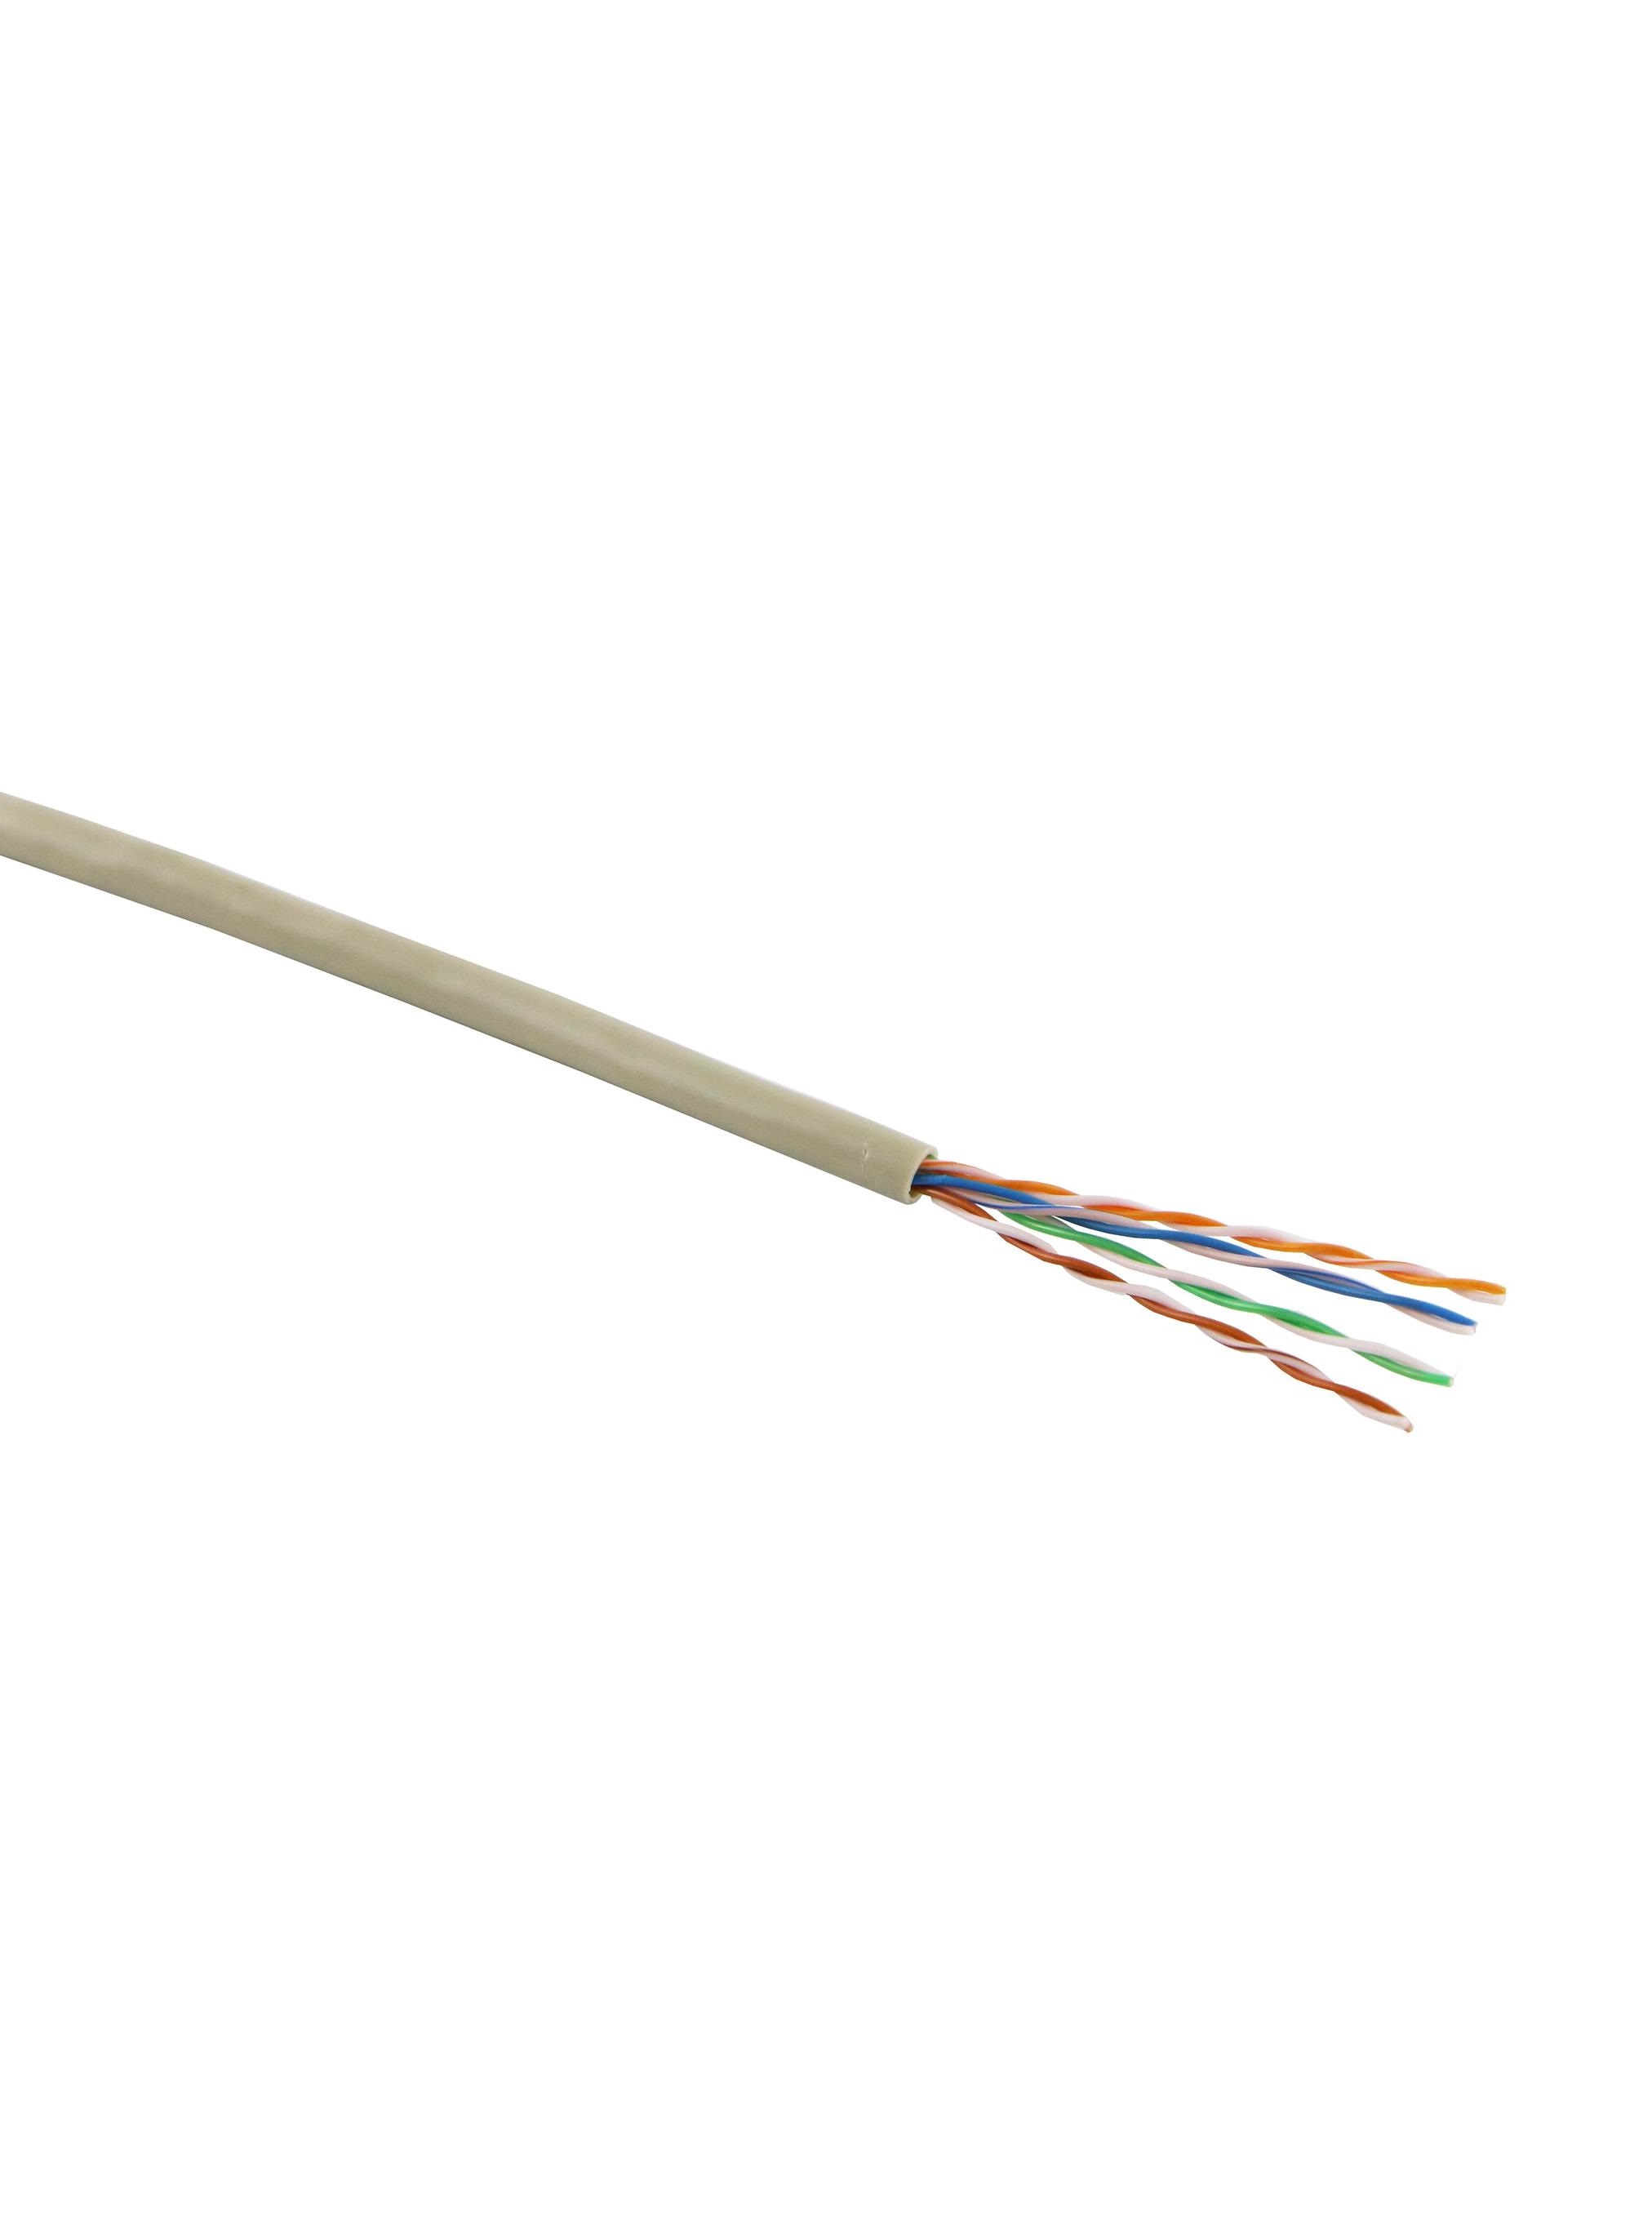 100-065 Excel networking UTP Cat 5e Cable 305m